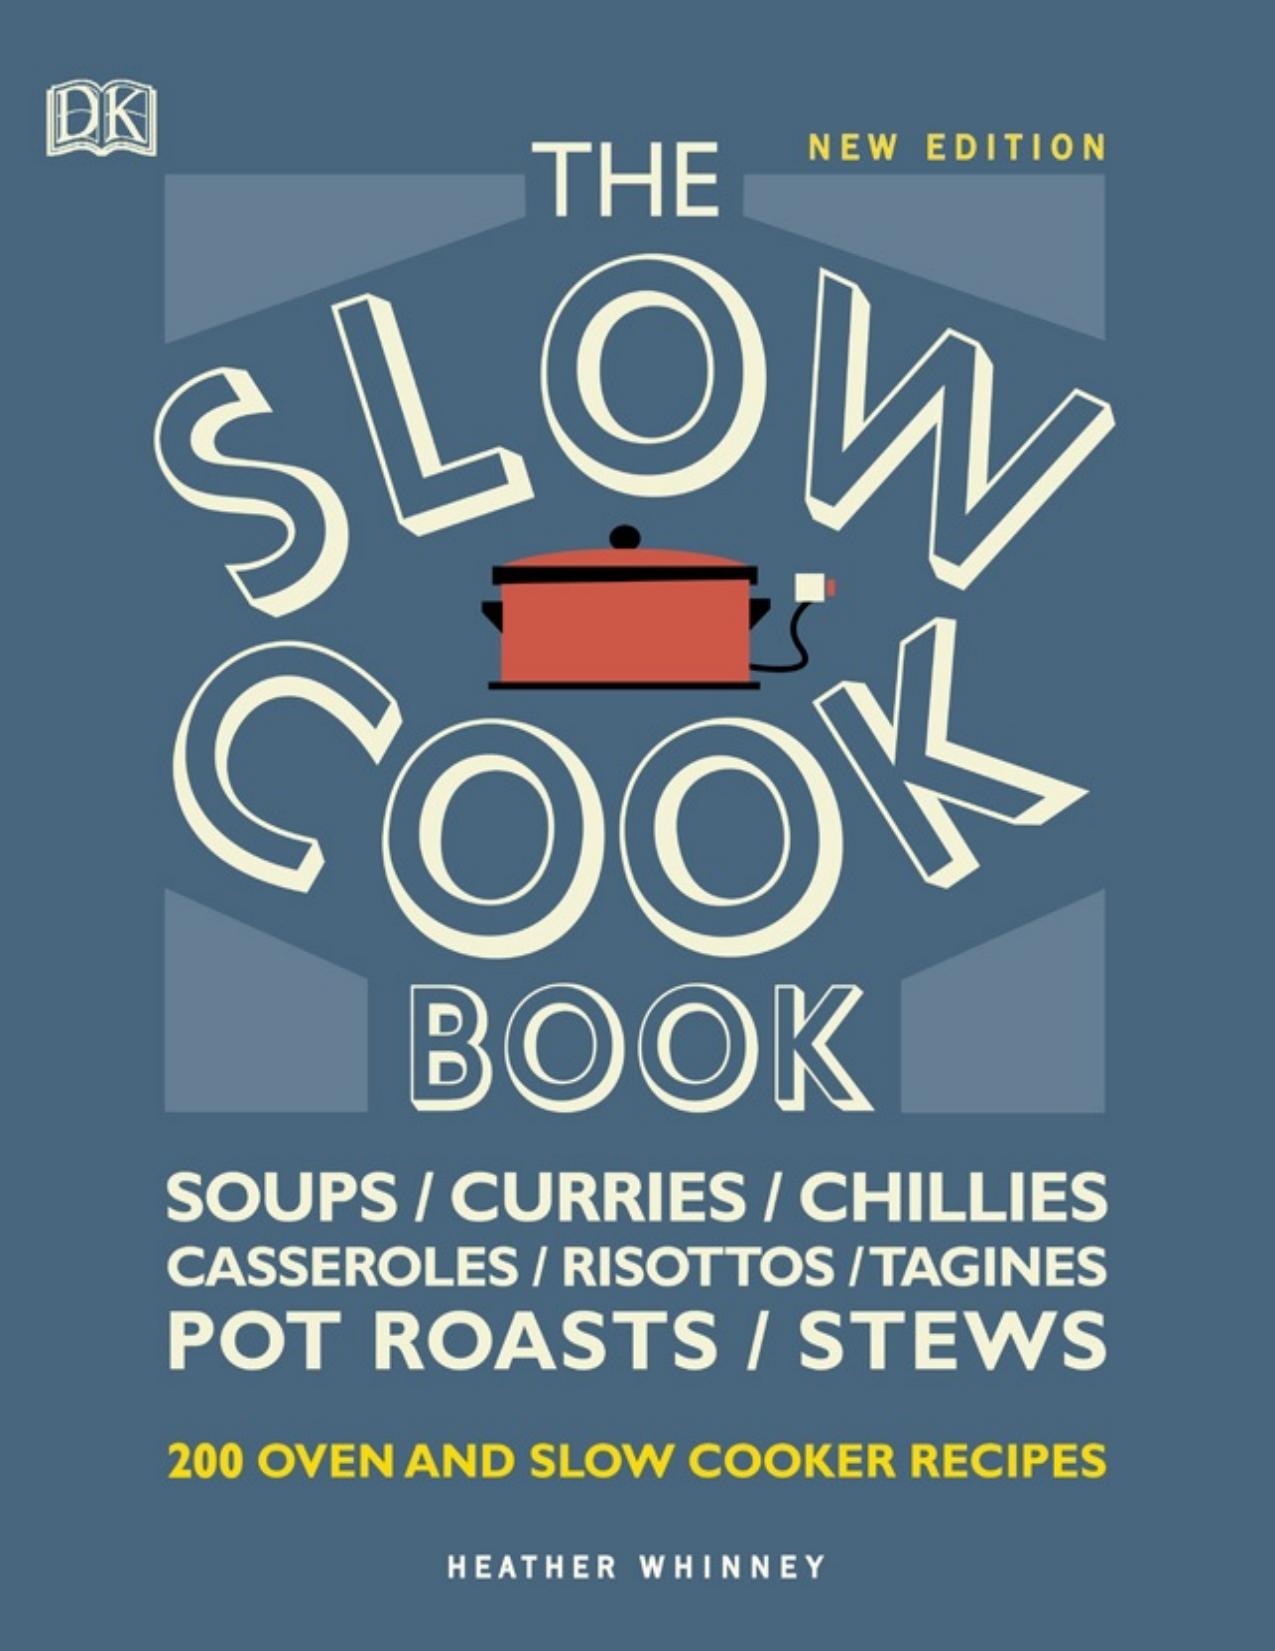 The Slow Cook Book: Over 200 Oven and Slow Cooker Recipes - PDFDrive.com